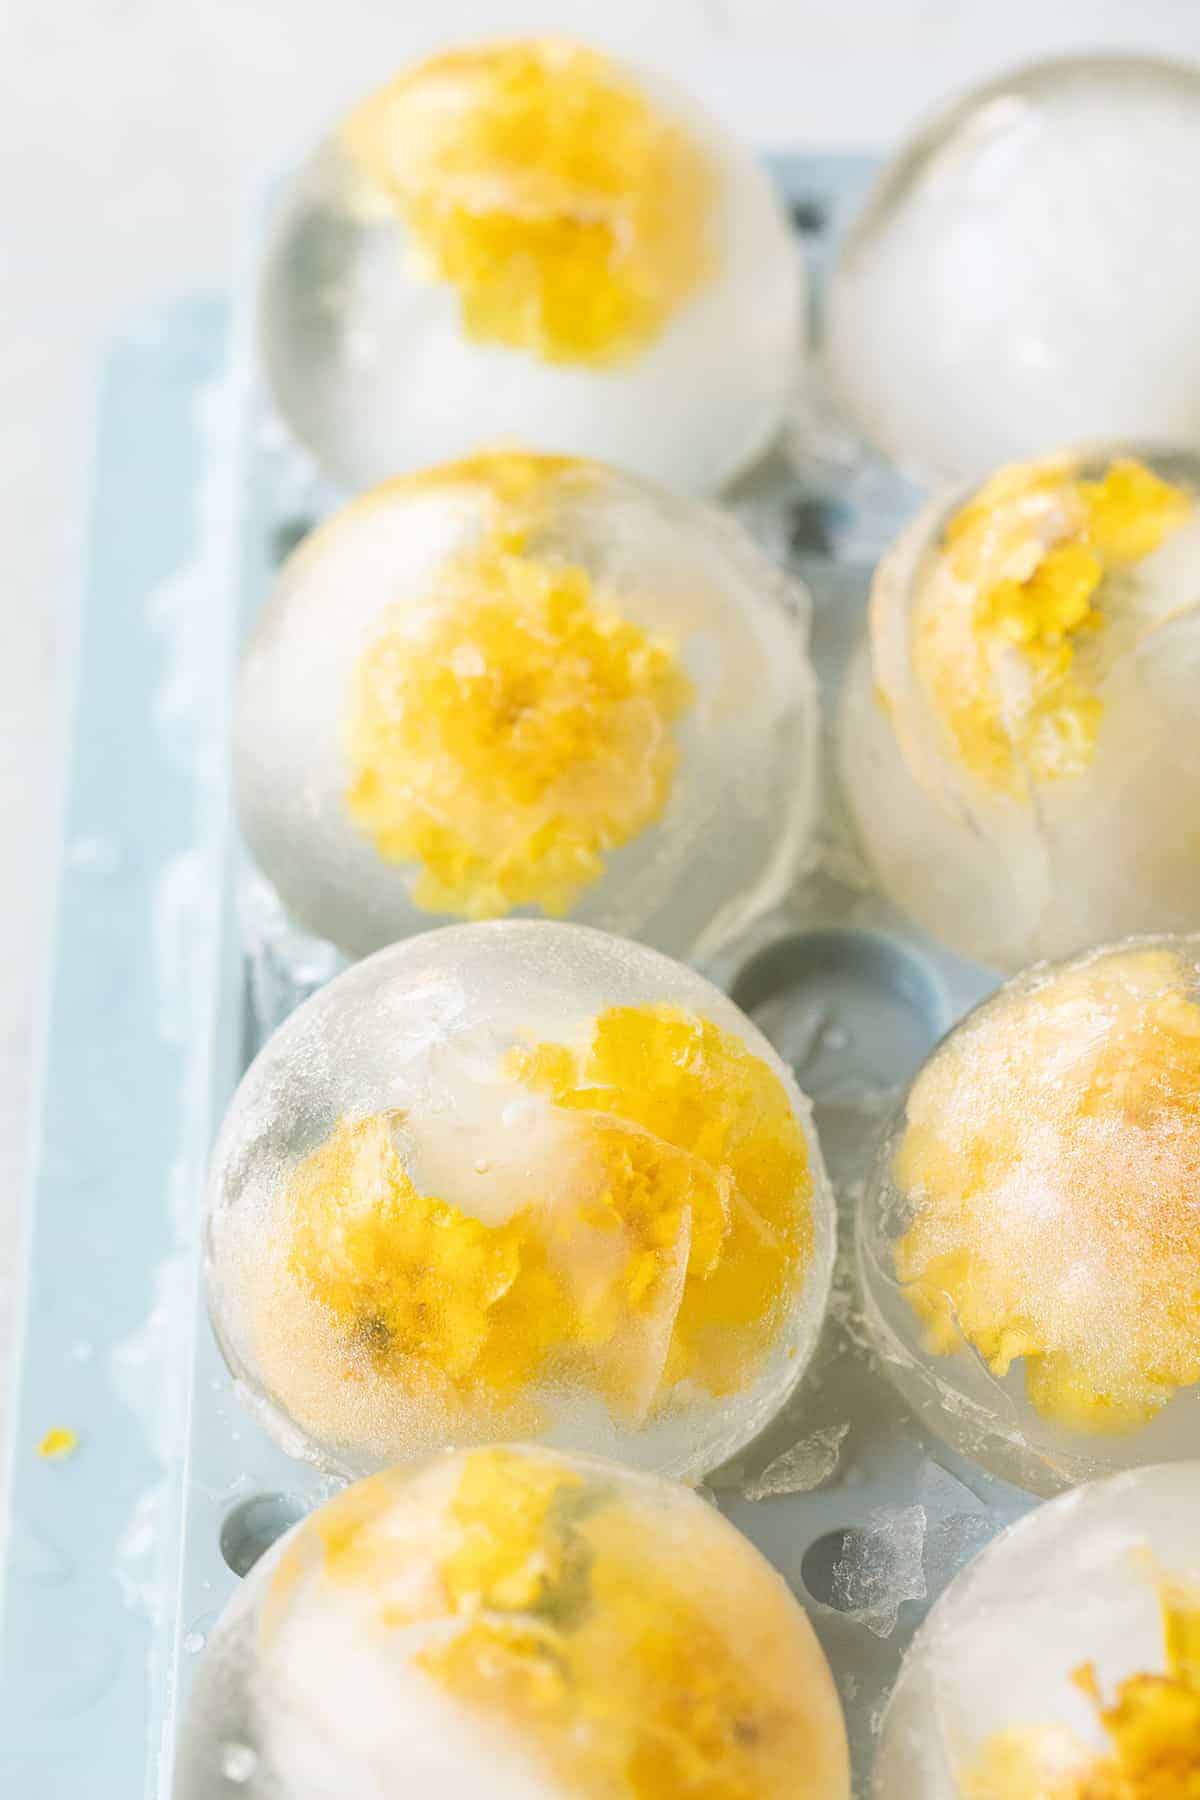 Floral ice spheres with edible flowers.